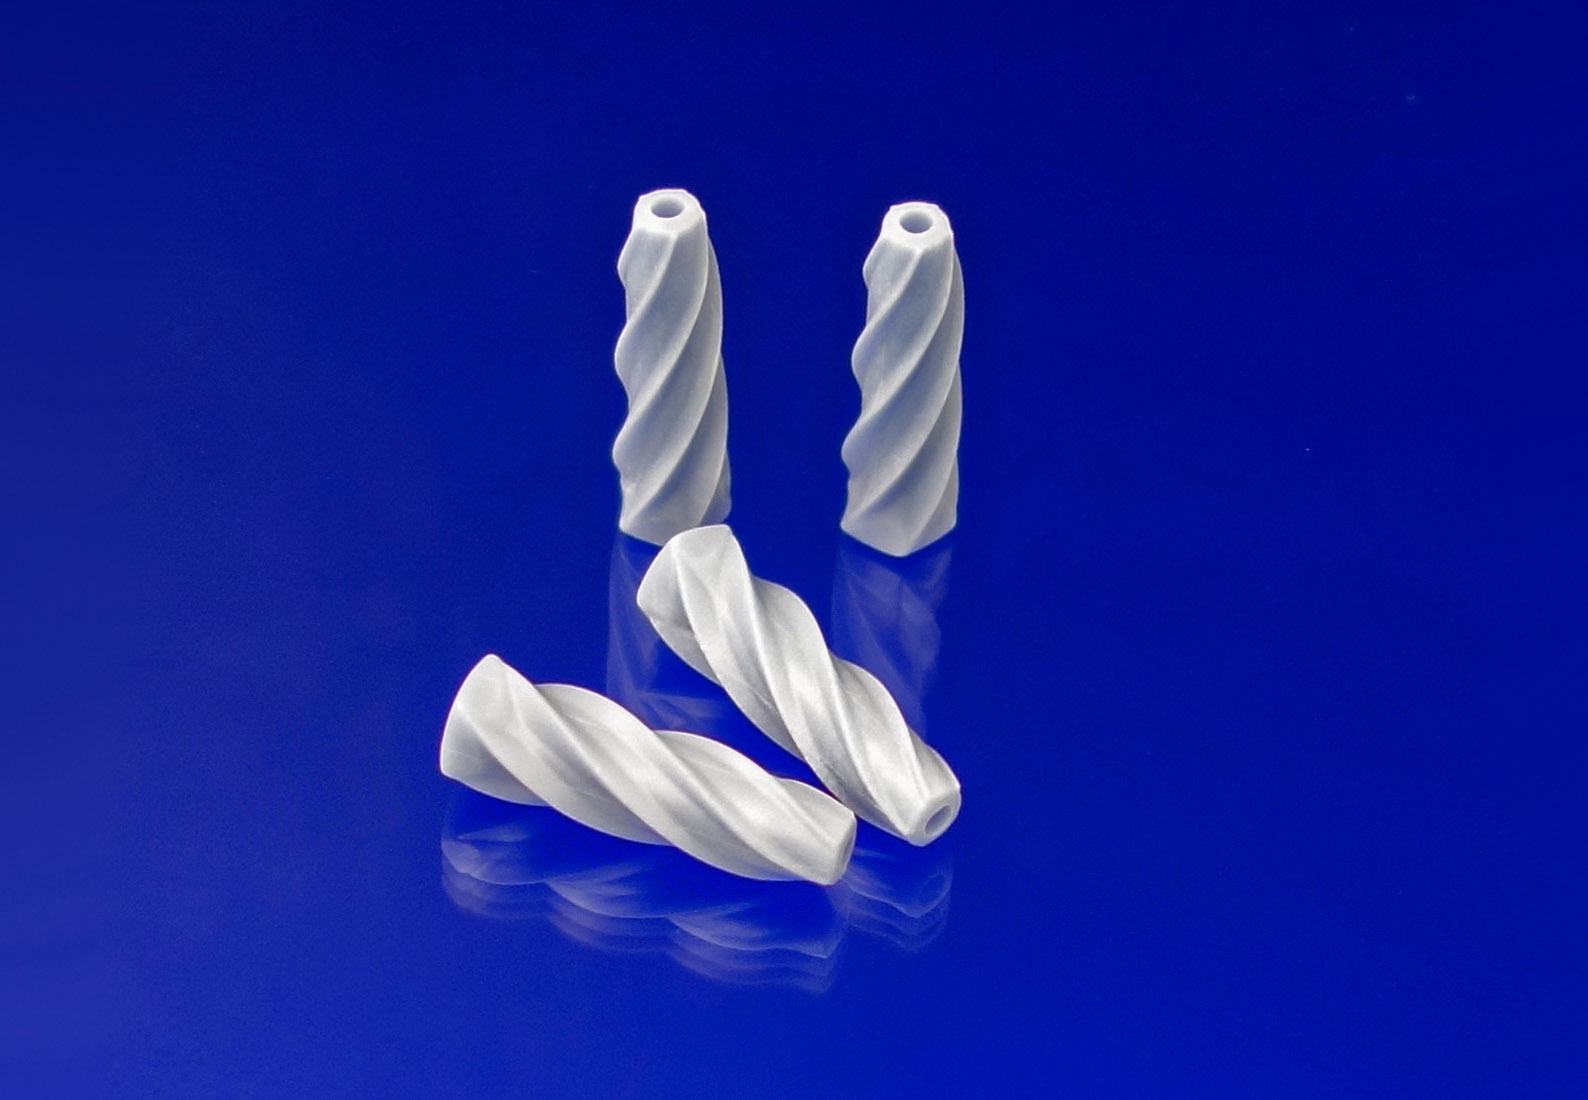 Bioceramic screw nails with a specially shaped thread can be introduced into bone with just a few rotations. 